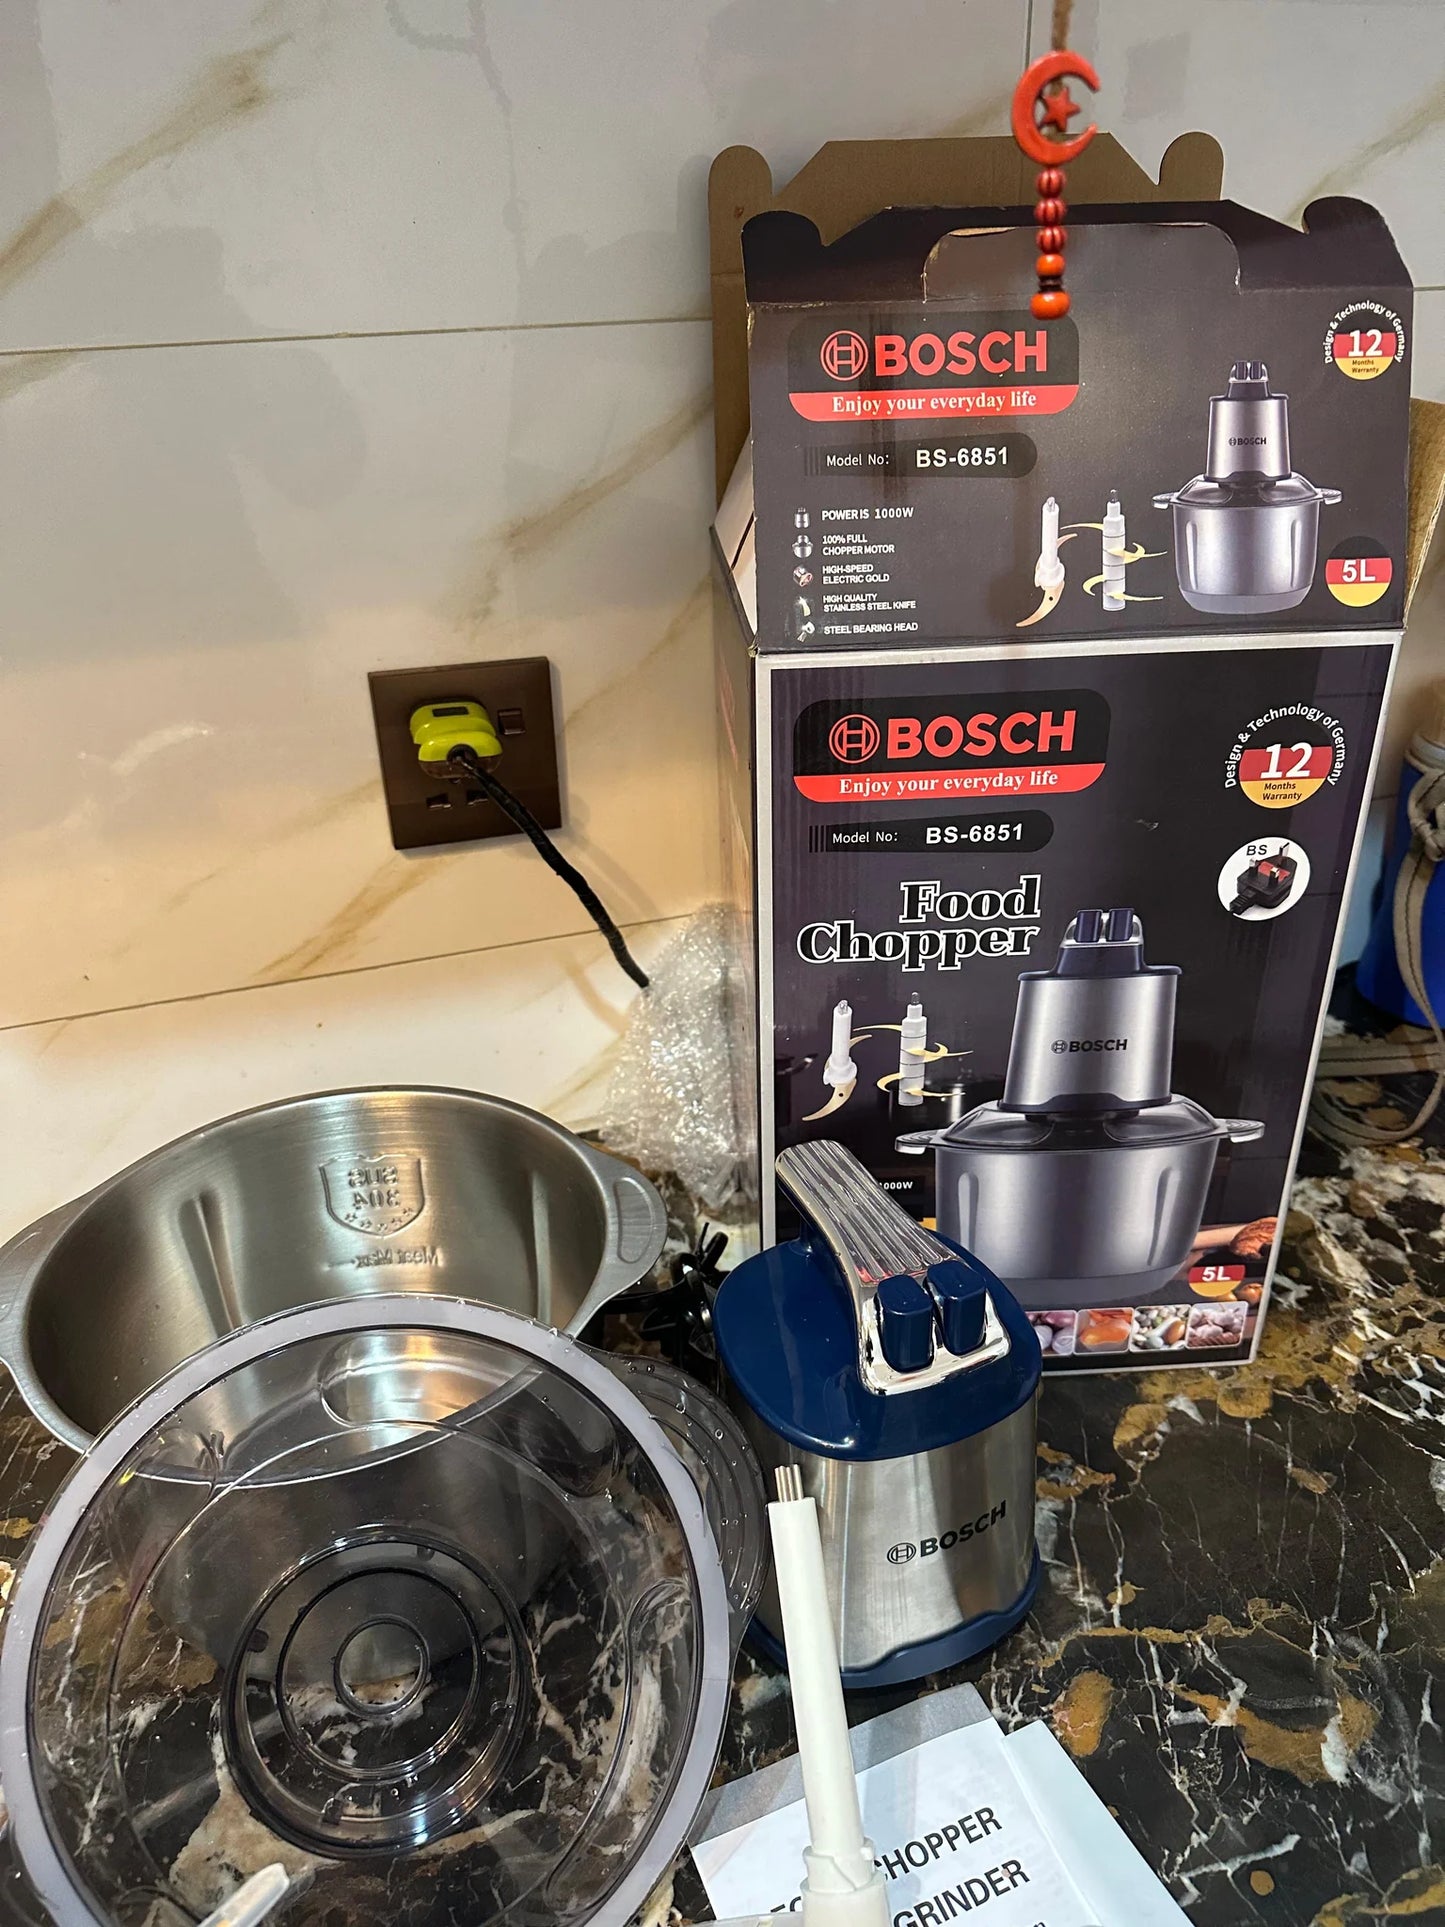 Lot Imported 5L BOSCH brand Meat and Vegetable Chopper LOT IMPORTED 5L BOSCH BRAND MEAT AND VEGETABLE CHOPPER